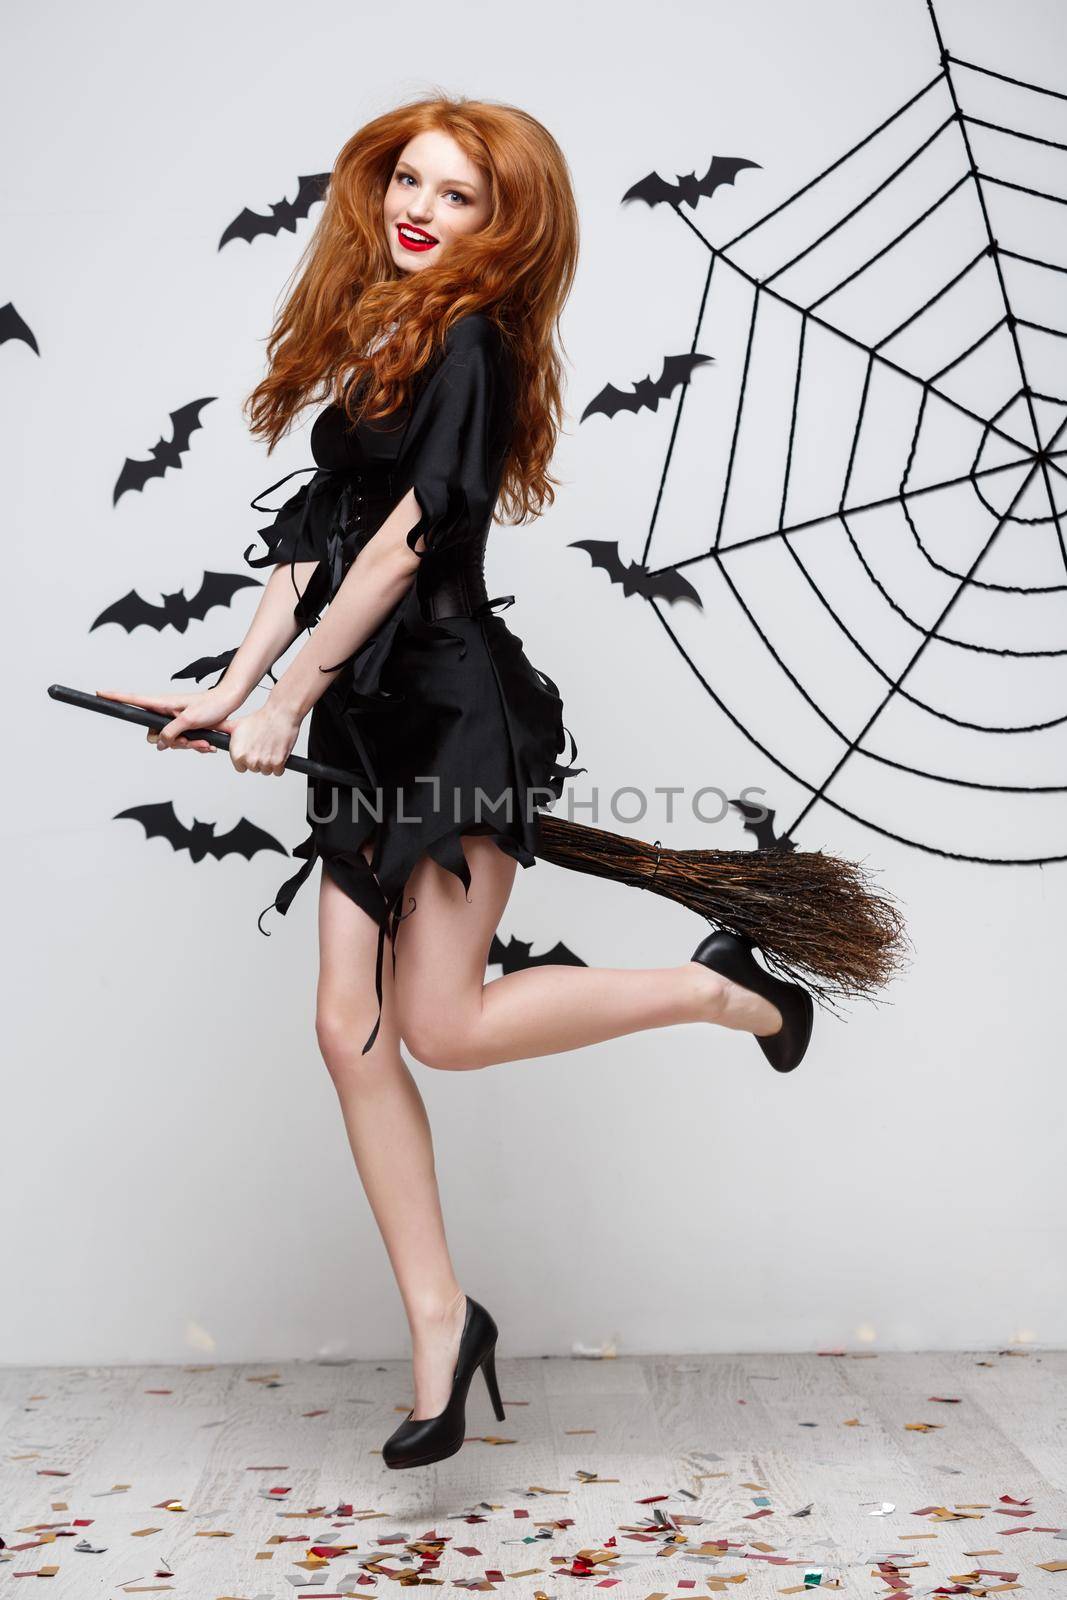 Halloween Concept - Happy elegant witch enjoy playing with broomstick halloween party over grey background